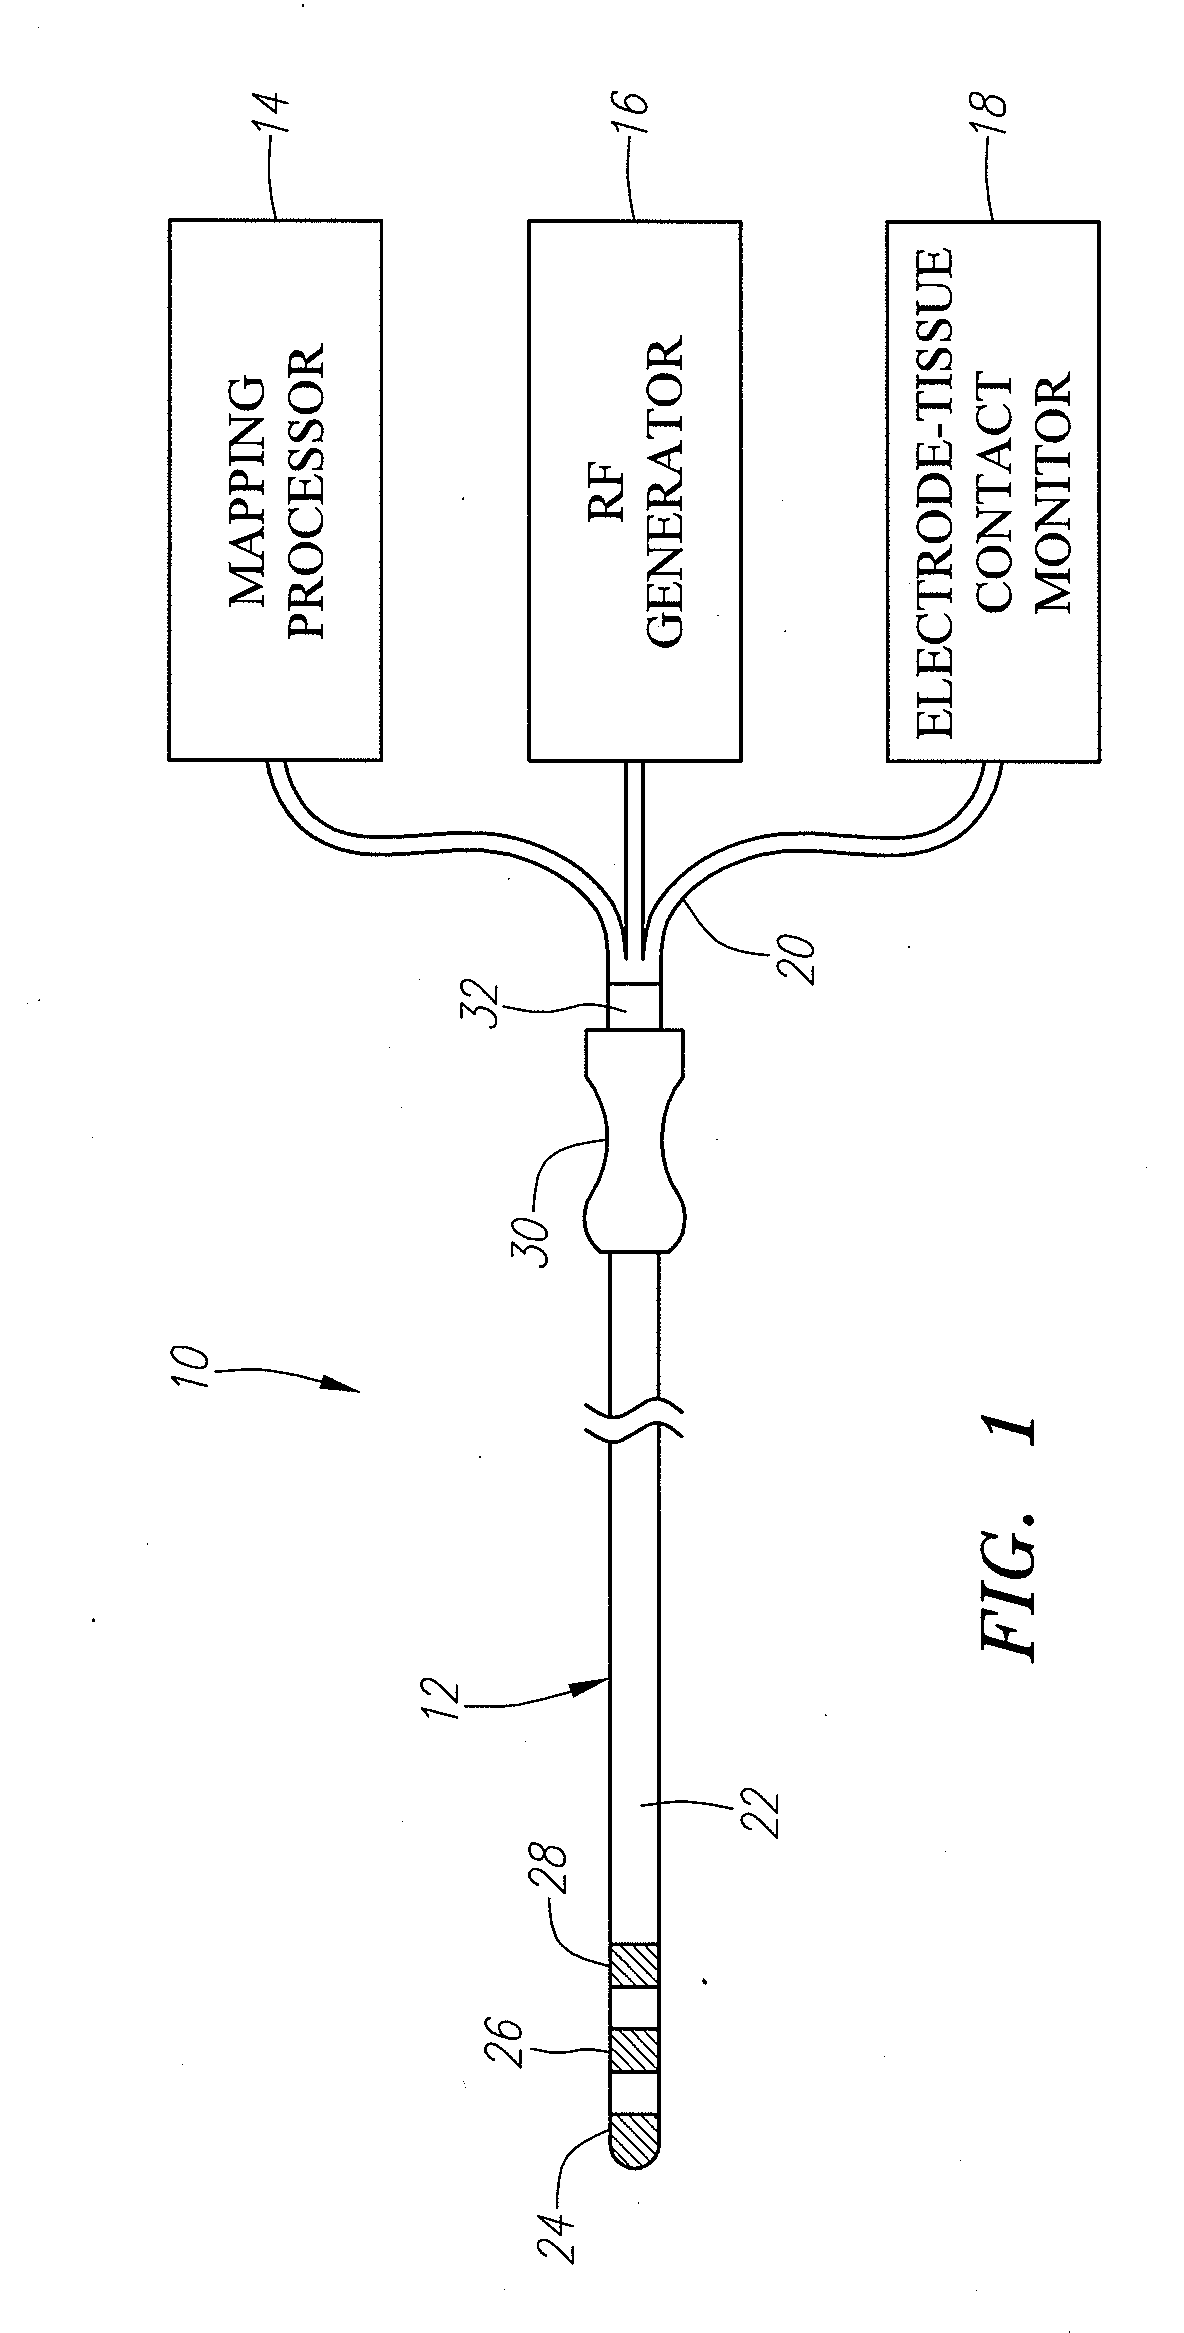 System and method for determining electrode-tissue contact based on amplitude modulation of sensed signal